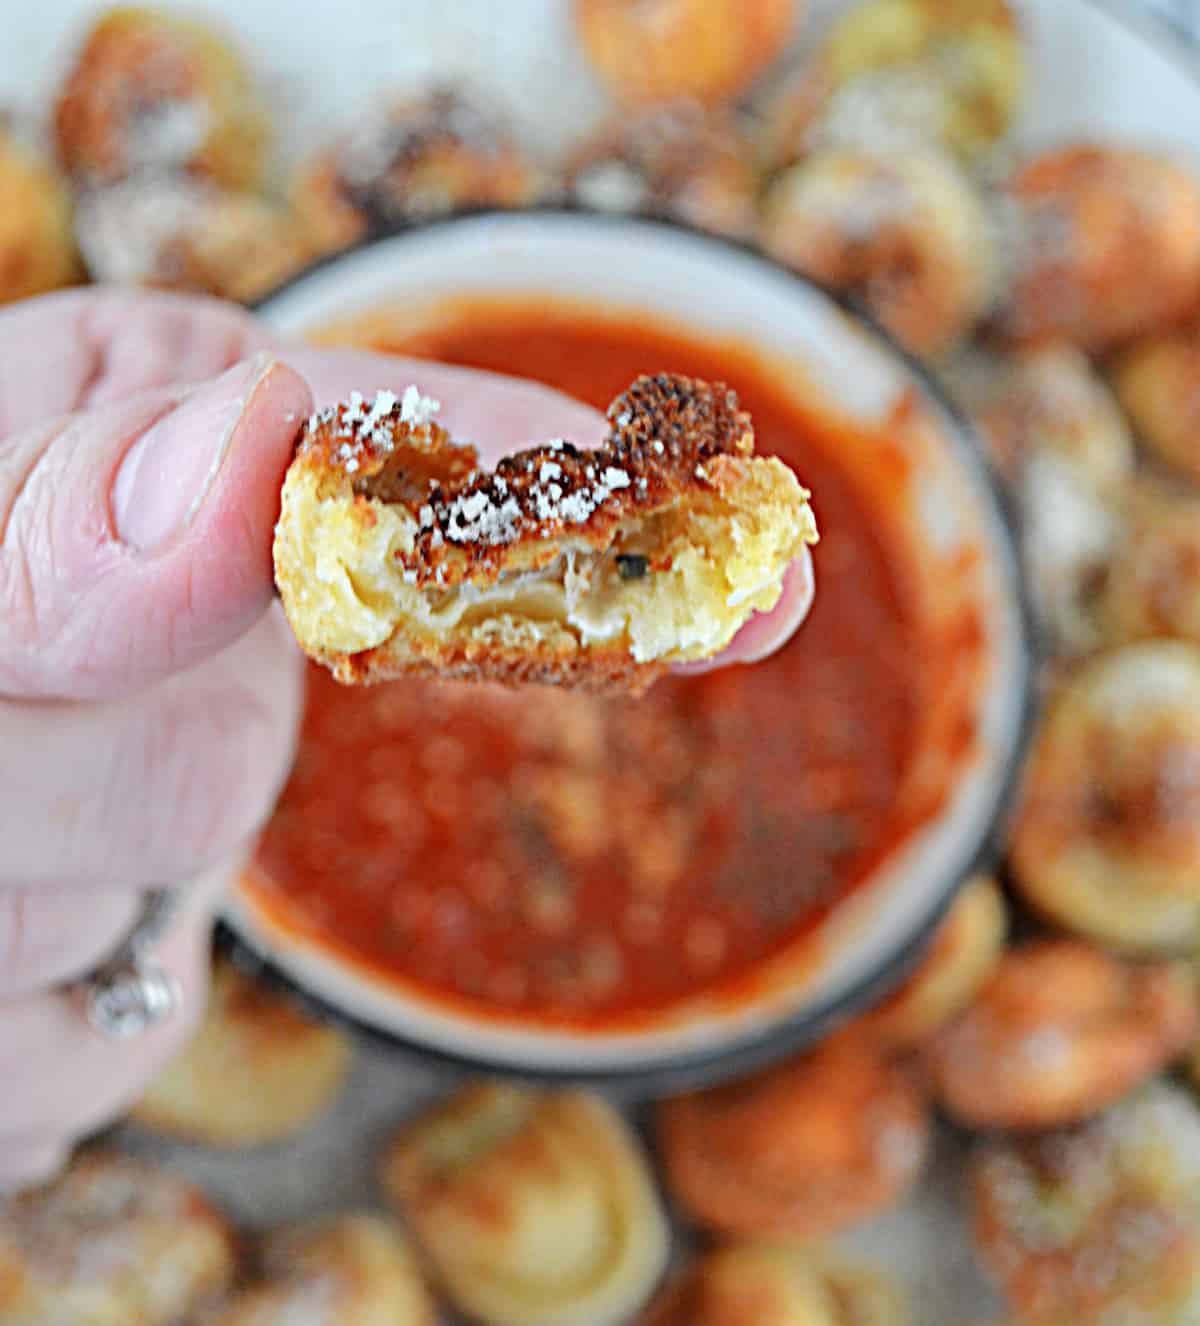 A hand holding a fried tortellini that has a bite taken out of it.